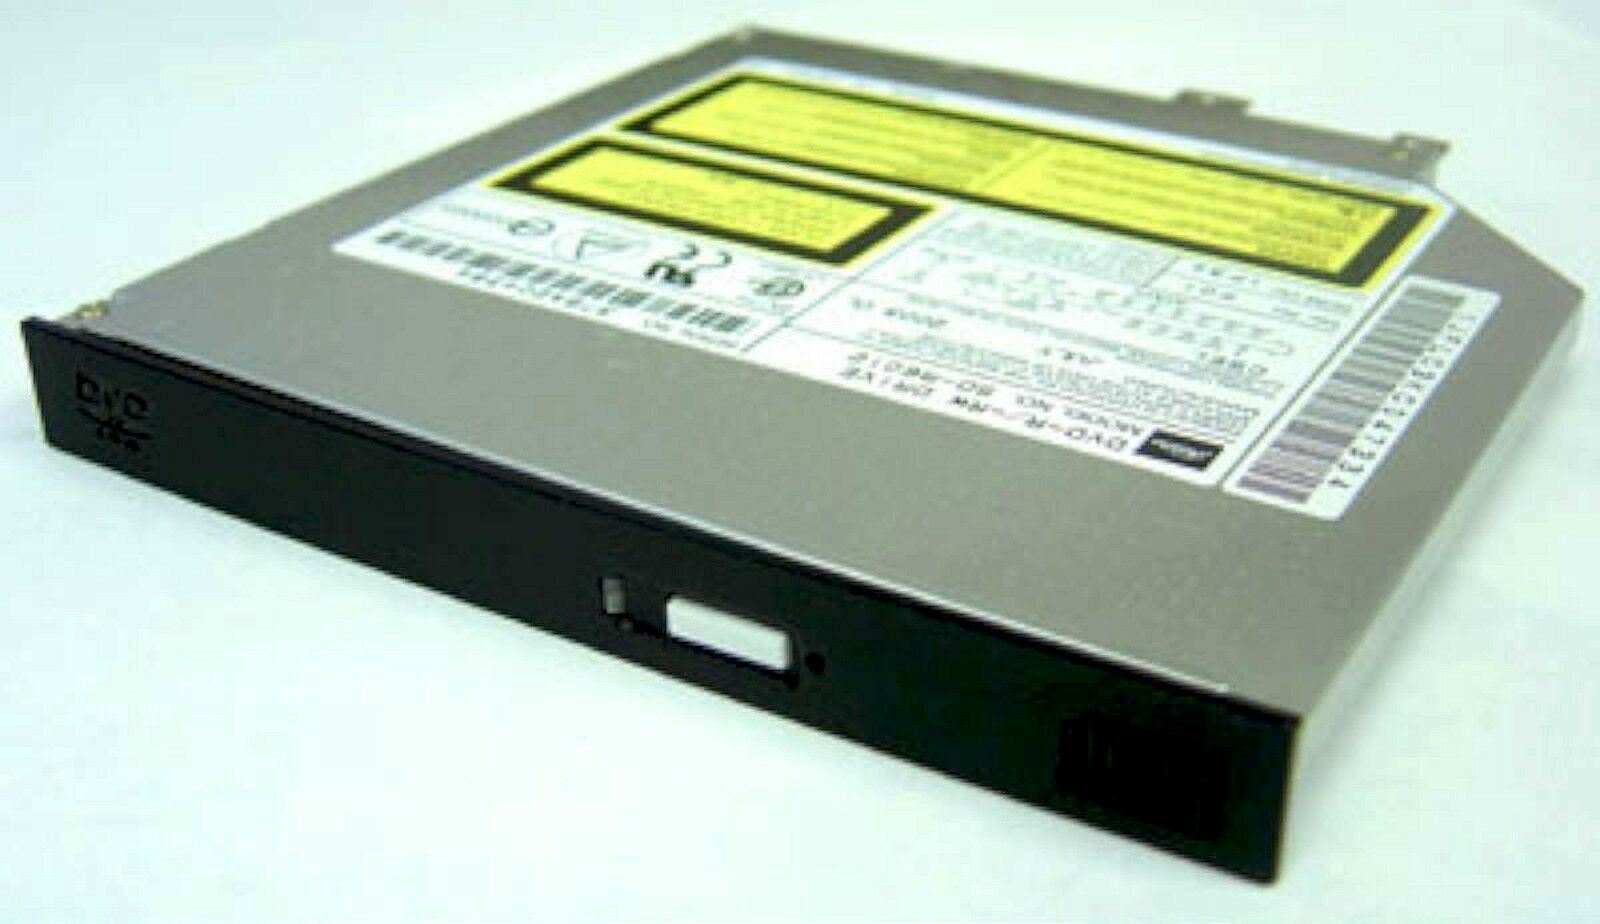 Primary image for HP Pavilion ze4000 ze5000 Laptop DVD/CDRW Combo Drive notebook computer parts